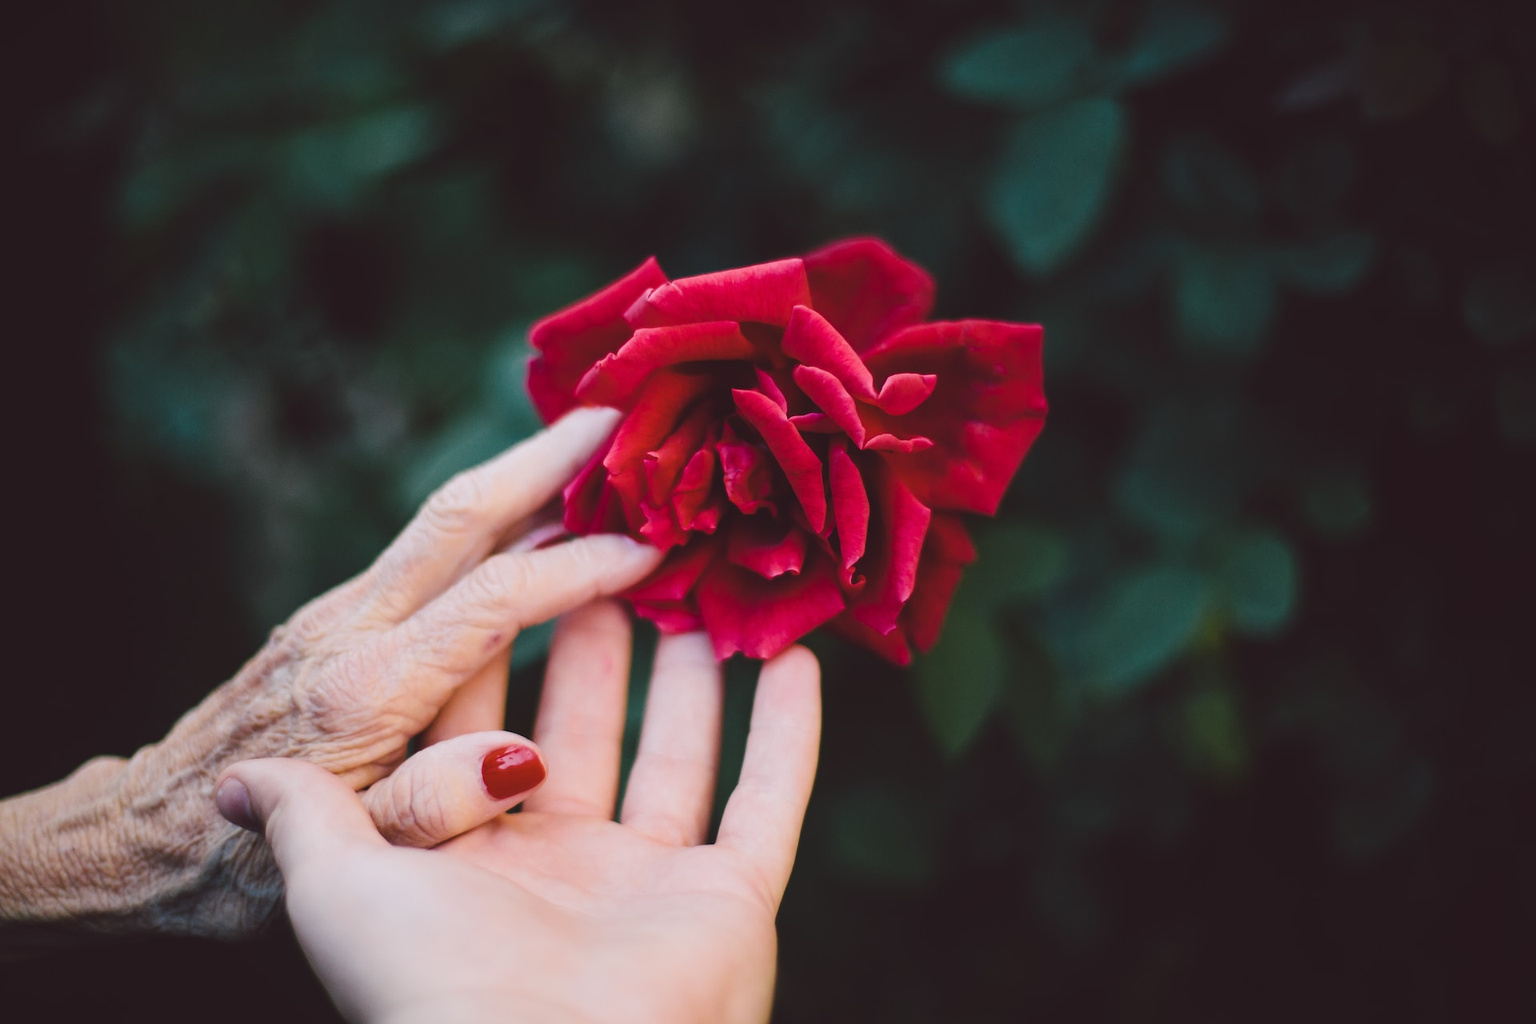 a young hand helping an older hand to reach for a red rose